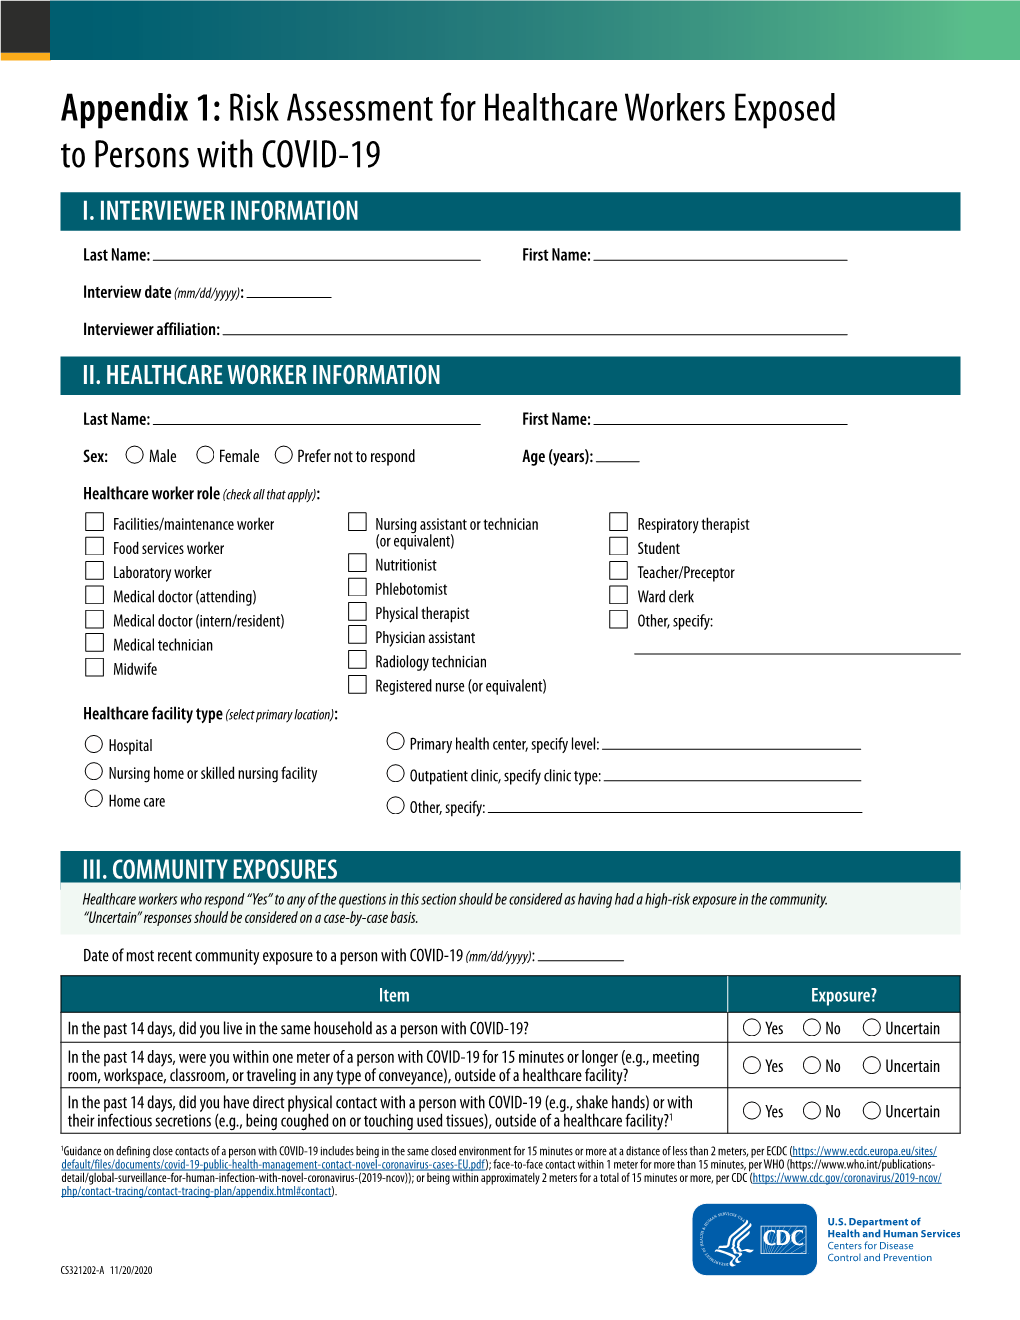 Appendix 1: Risk Assessment for Healthcare Workers Exposed to Persons with COVID-19 I